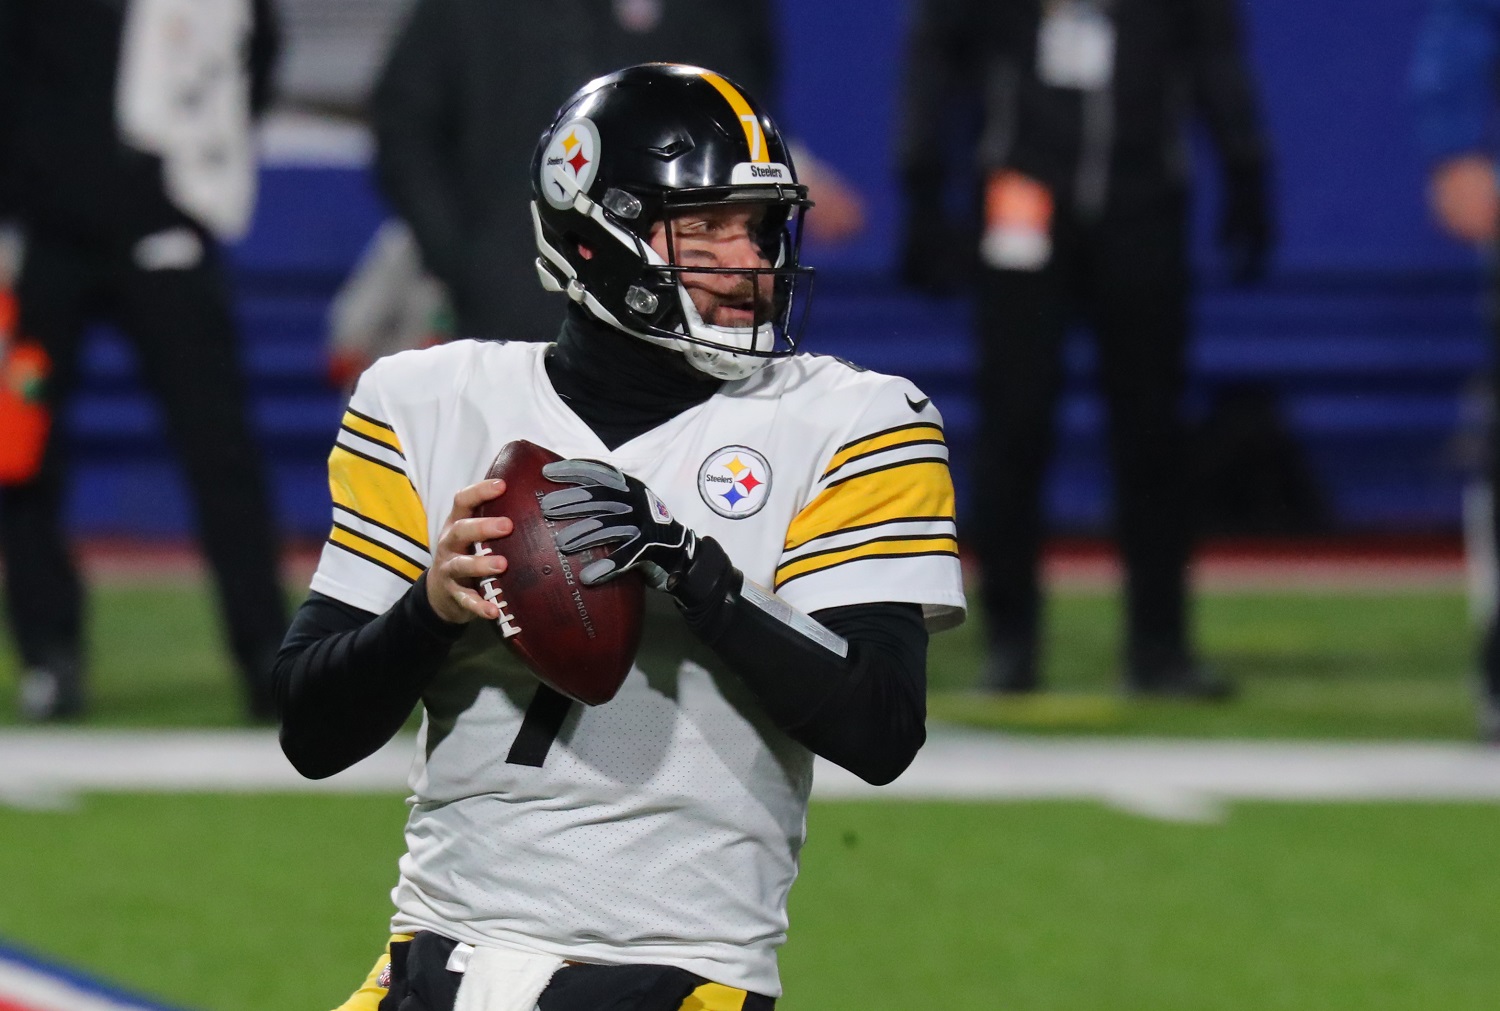 Ben Roethlisberger of the Pittsburgh Steelers looks to throw against the Buffalo Bills at Bills Stadium on Dec. 13, 2020. in Orchard Park, New York. | Timothy T Ludwig/Getty Images